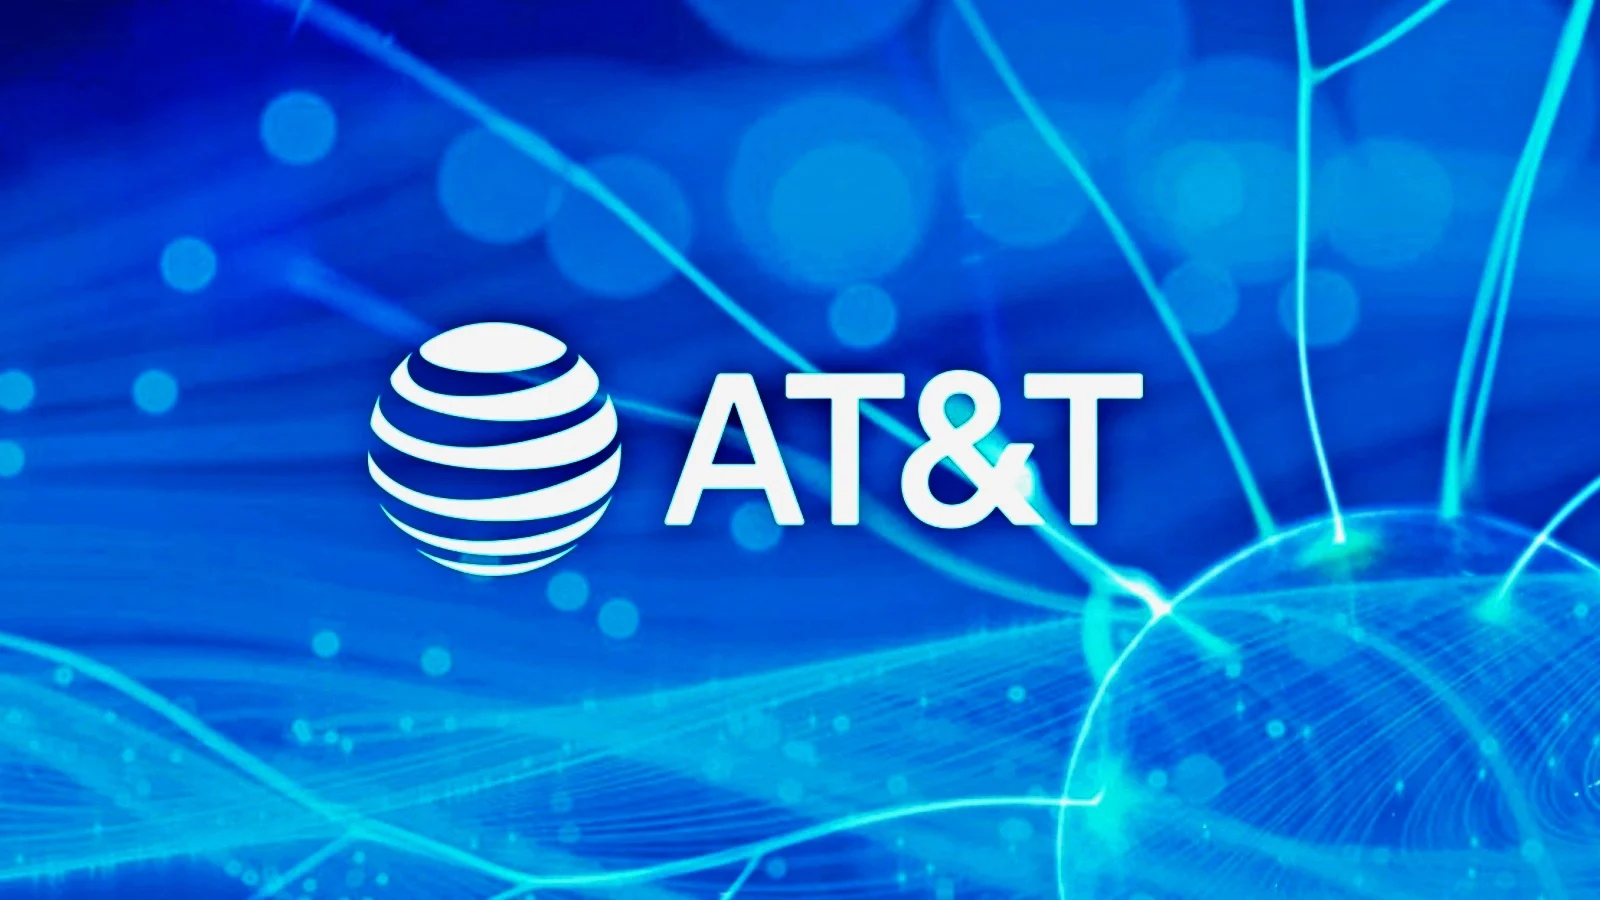 Millions Affected: What You Need to Know About the Recent AT&T Privacy Leak